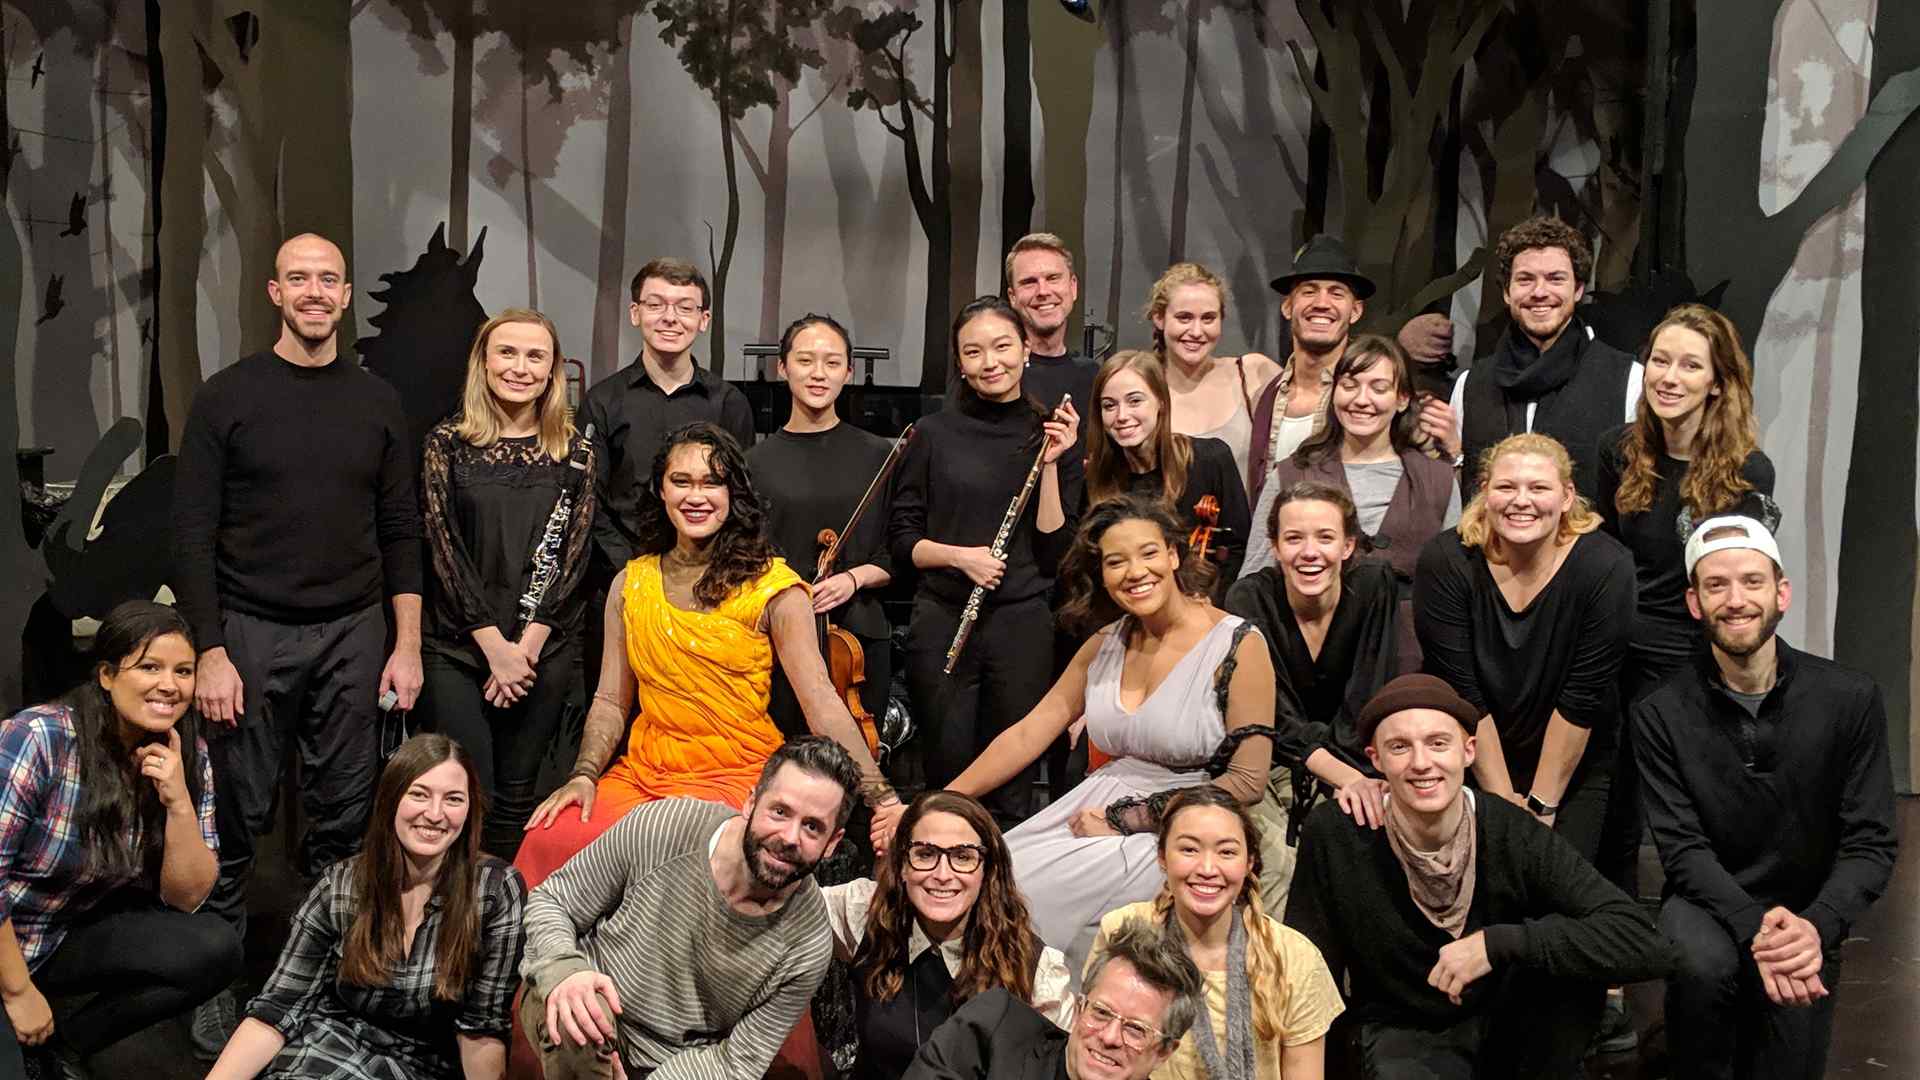 'Into the Woods' cast and crew